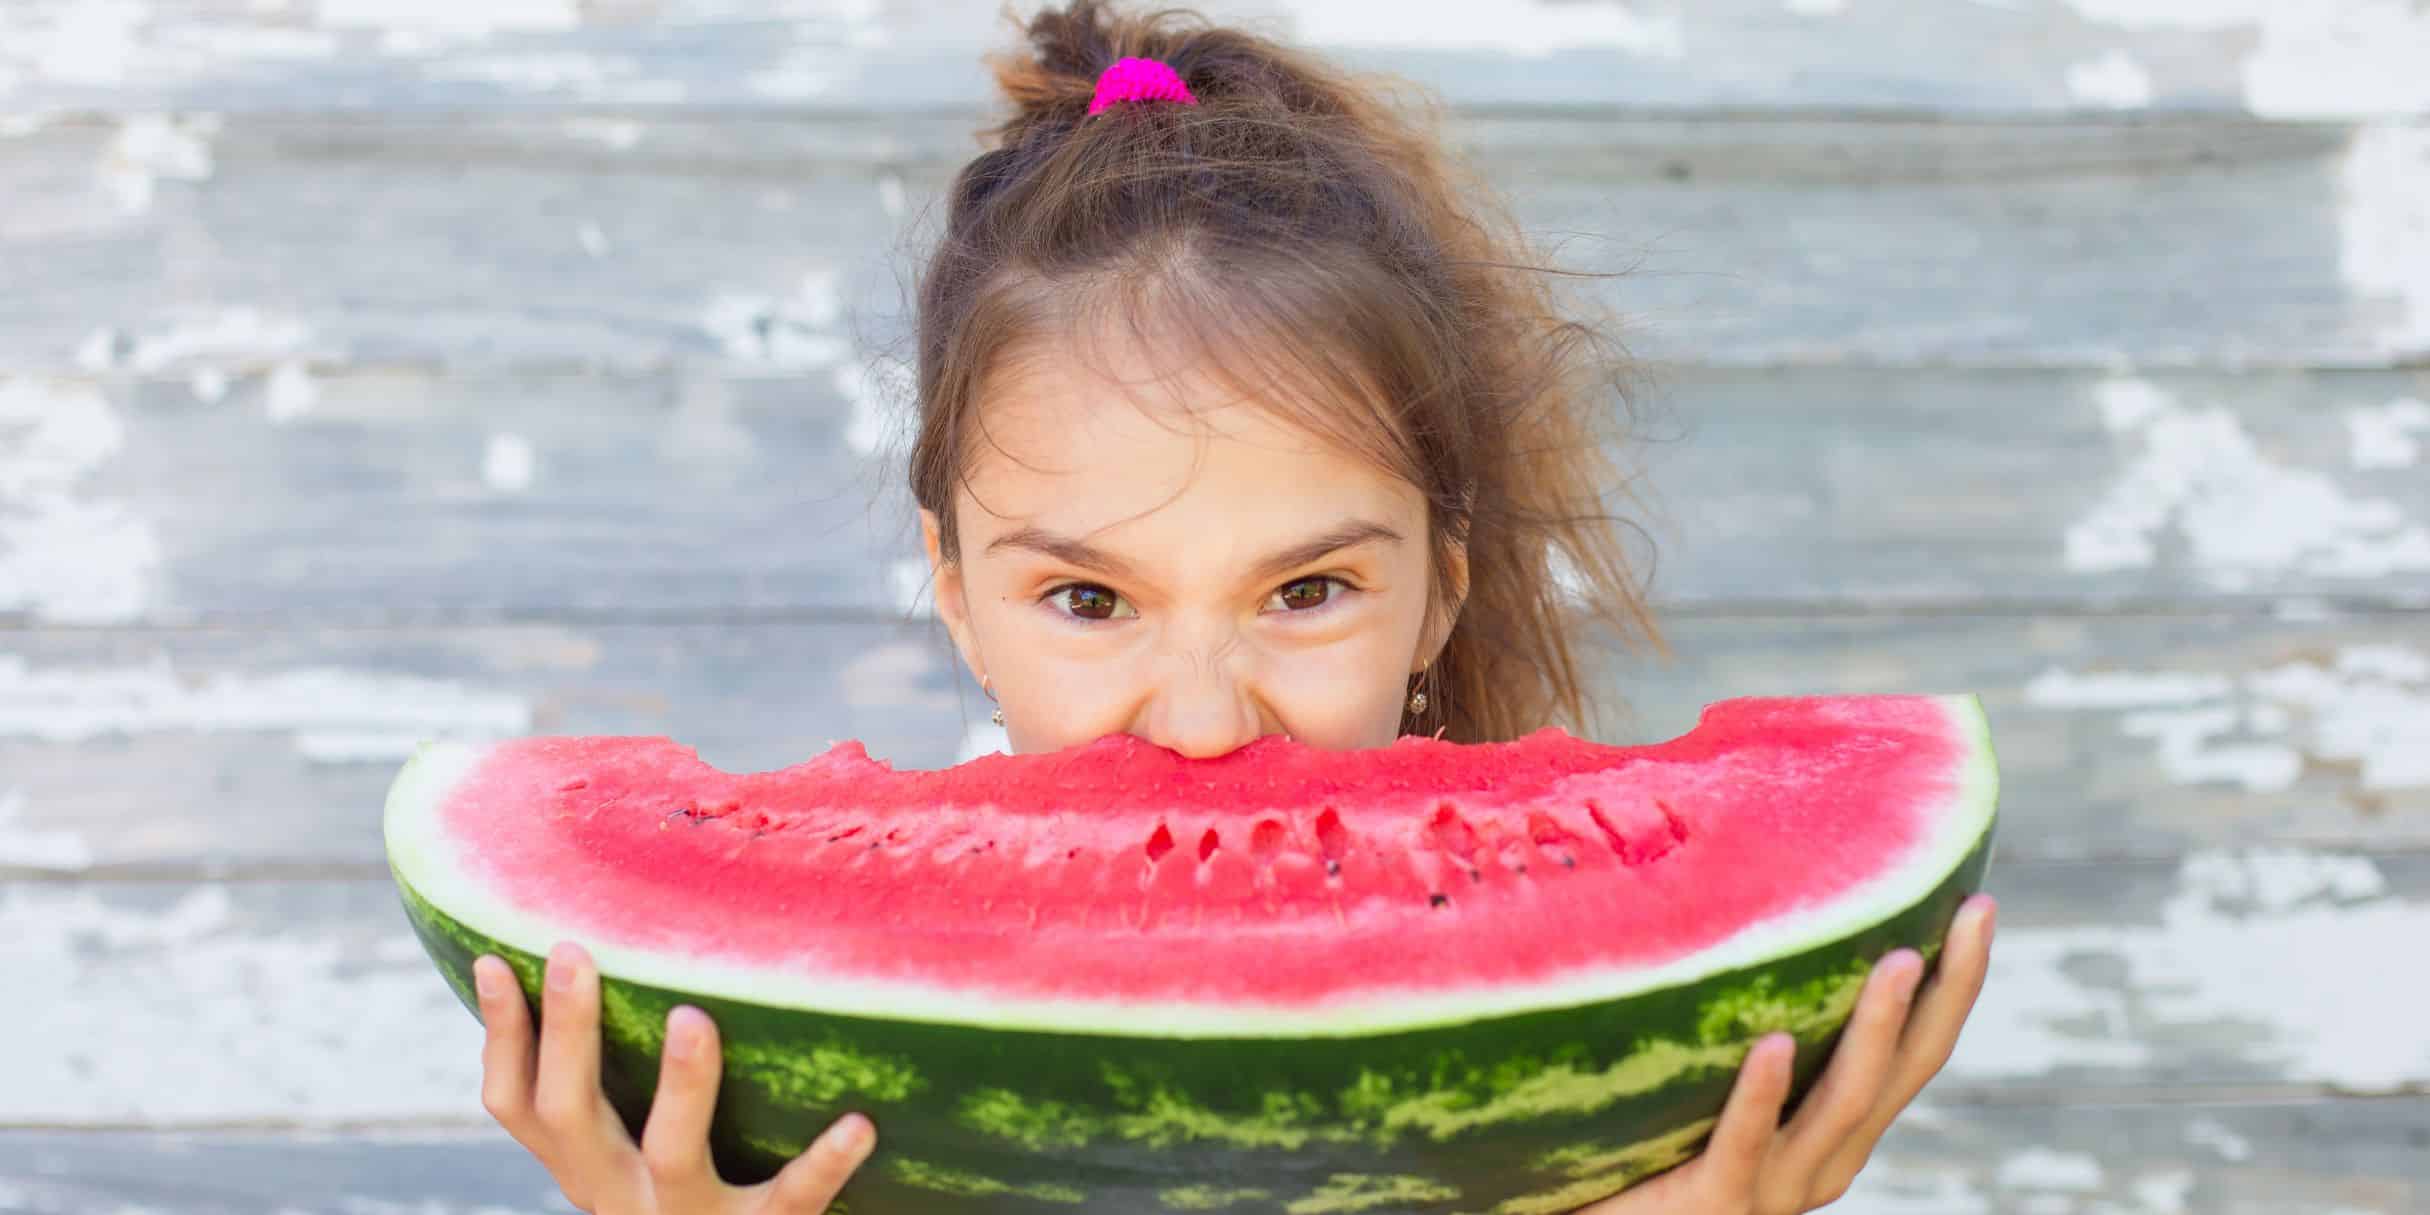 girl stuffing her mouth with a giant watermelon wedge